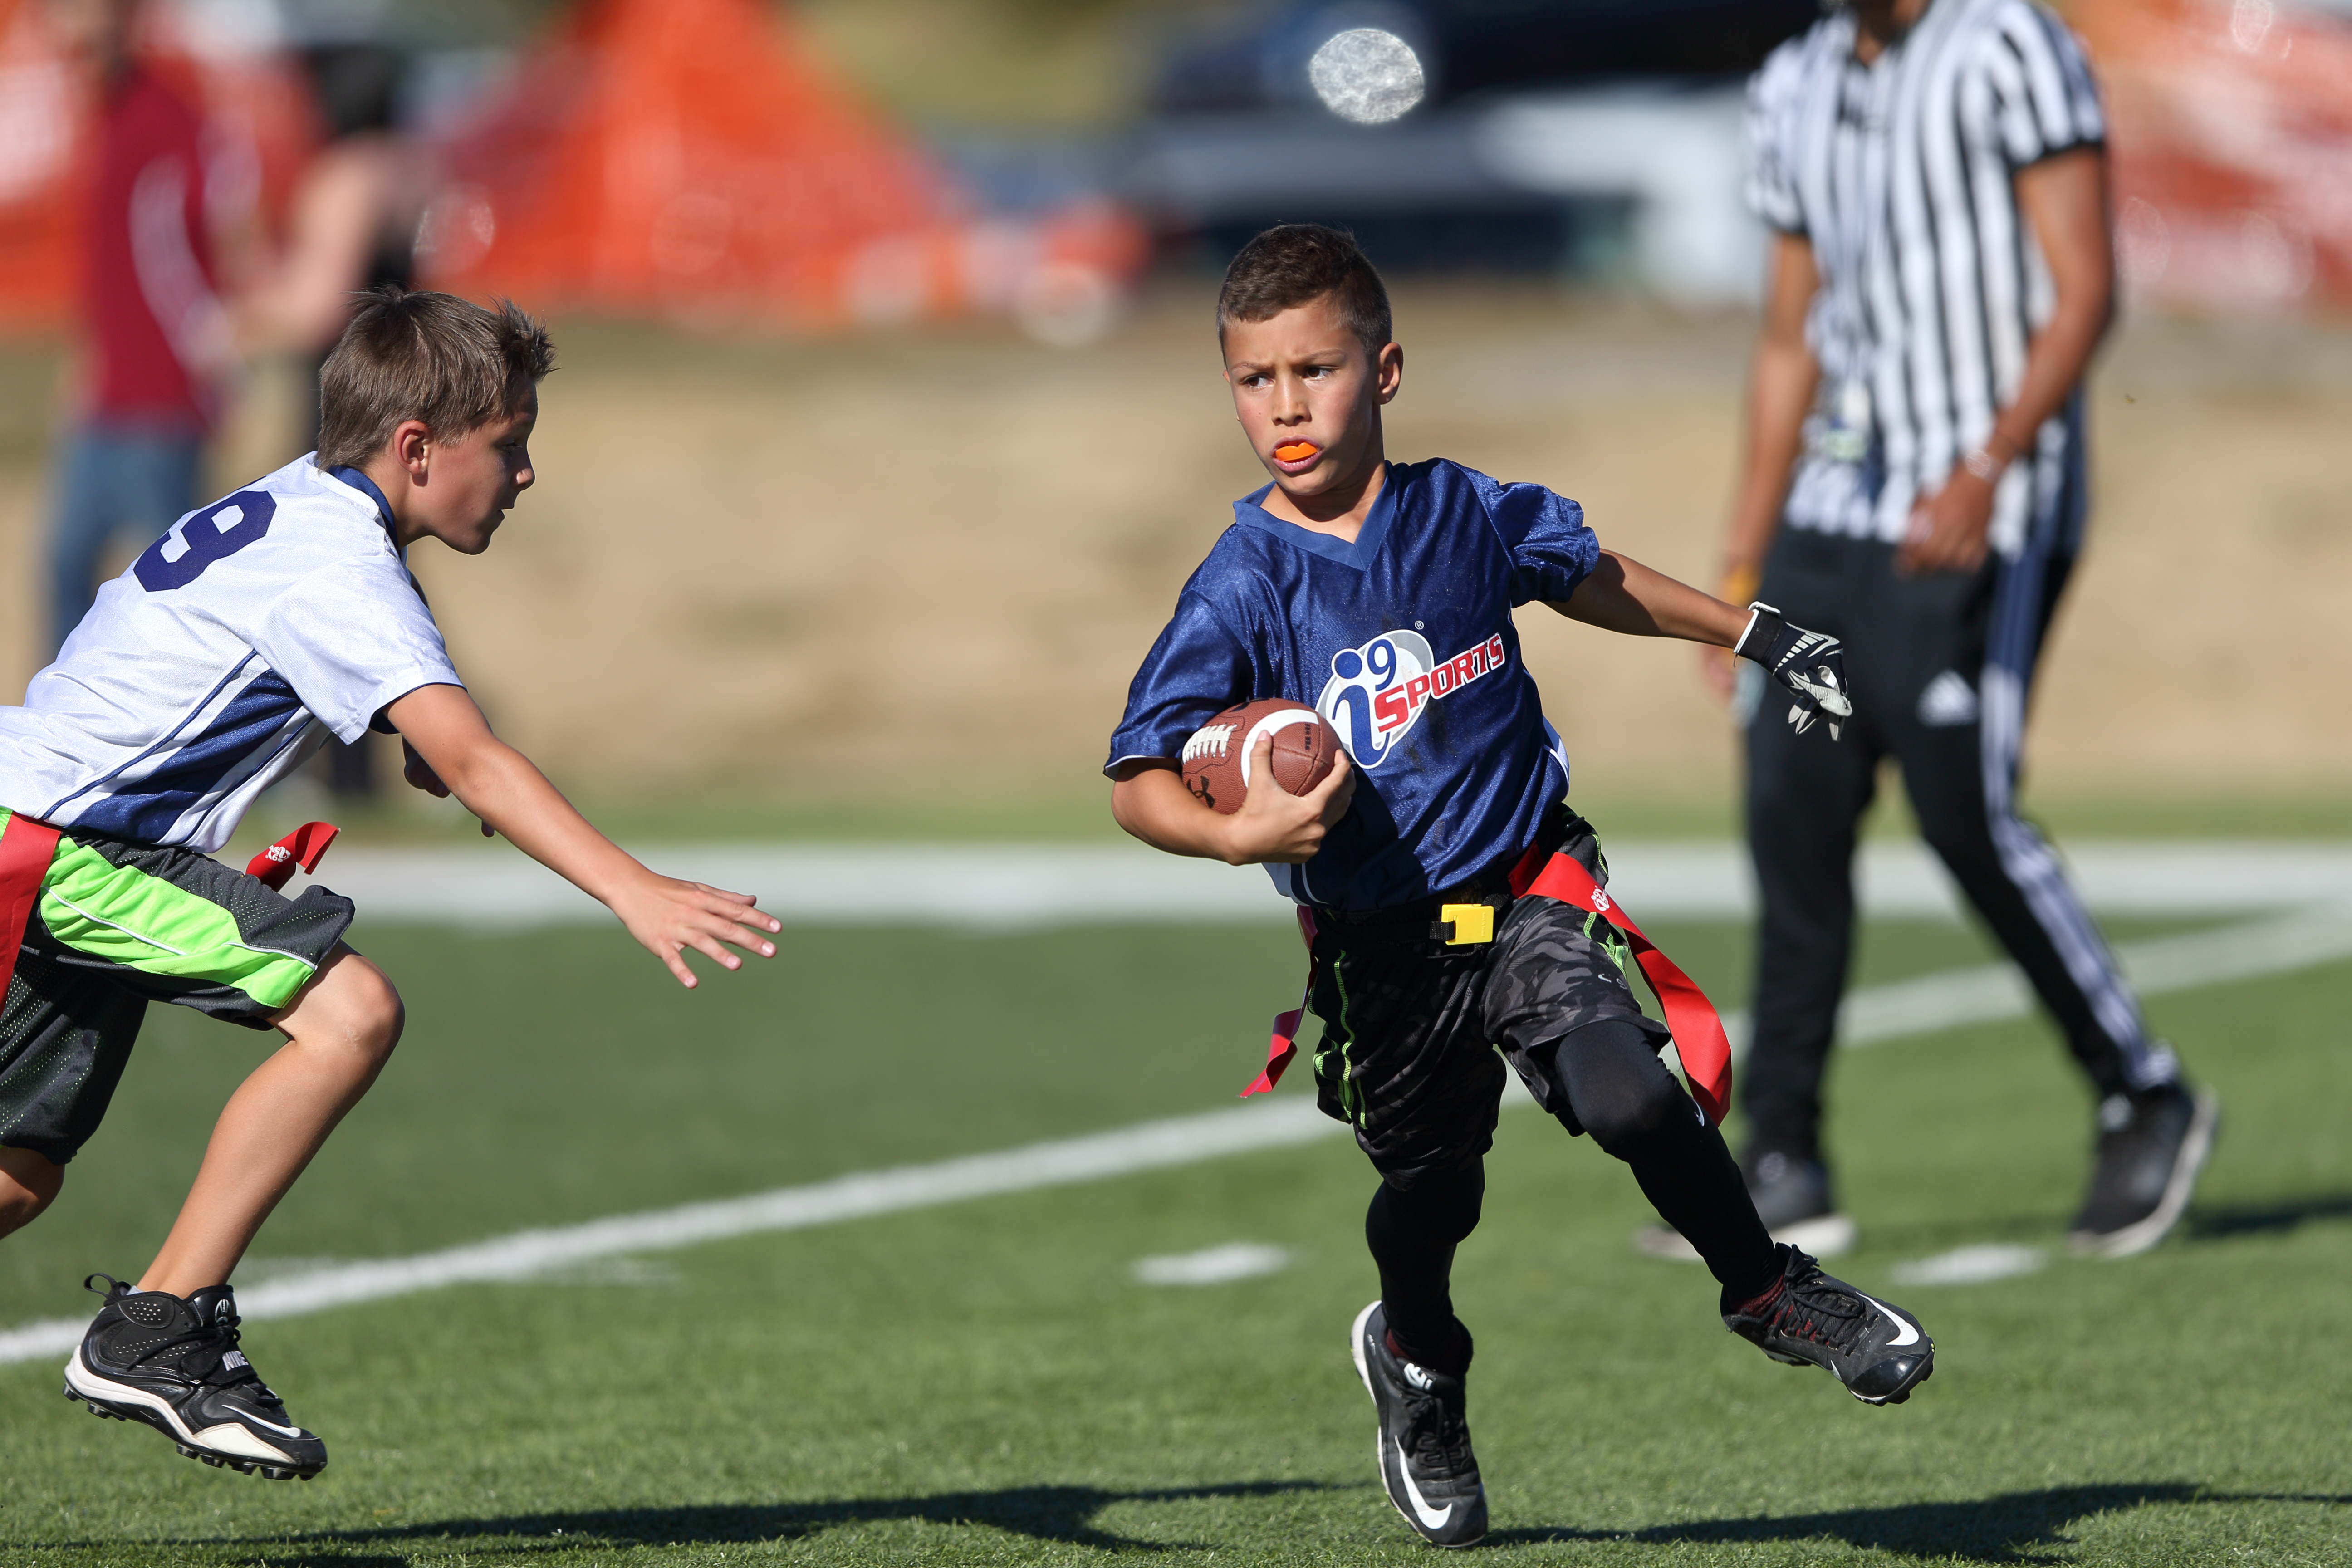 kids flag football game with i9 sports